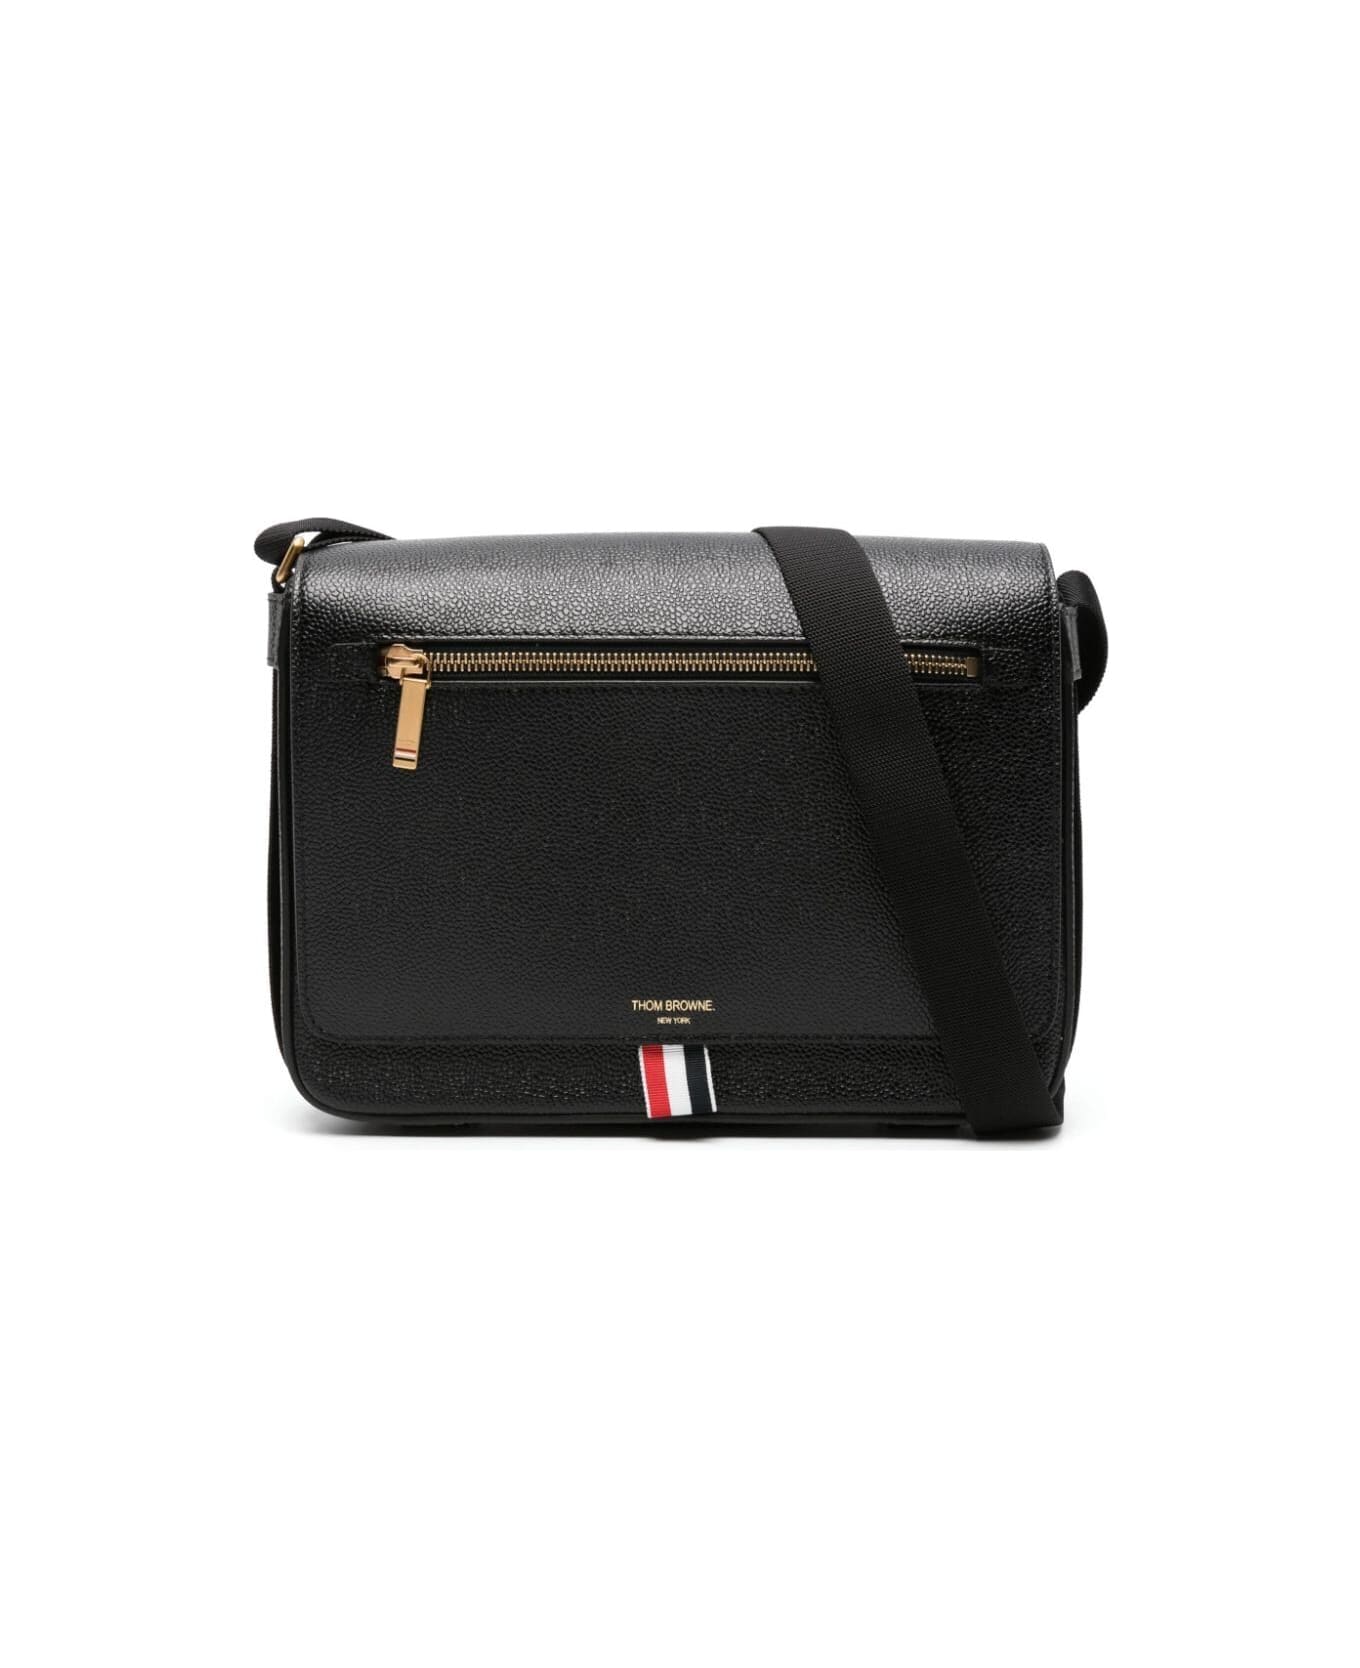 Thom Browne Reporter Bag With Webbing Strap In Pebble Grain Leather - Black